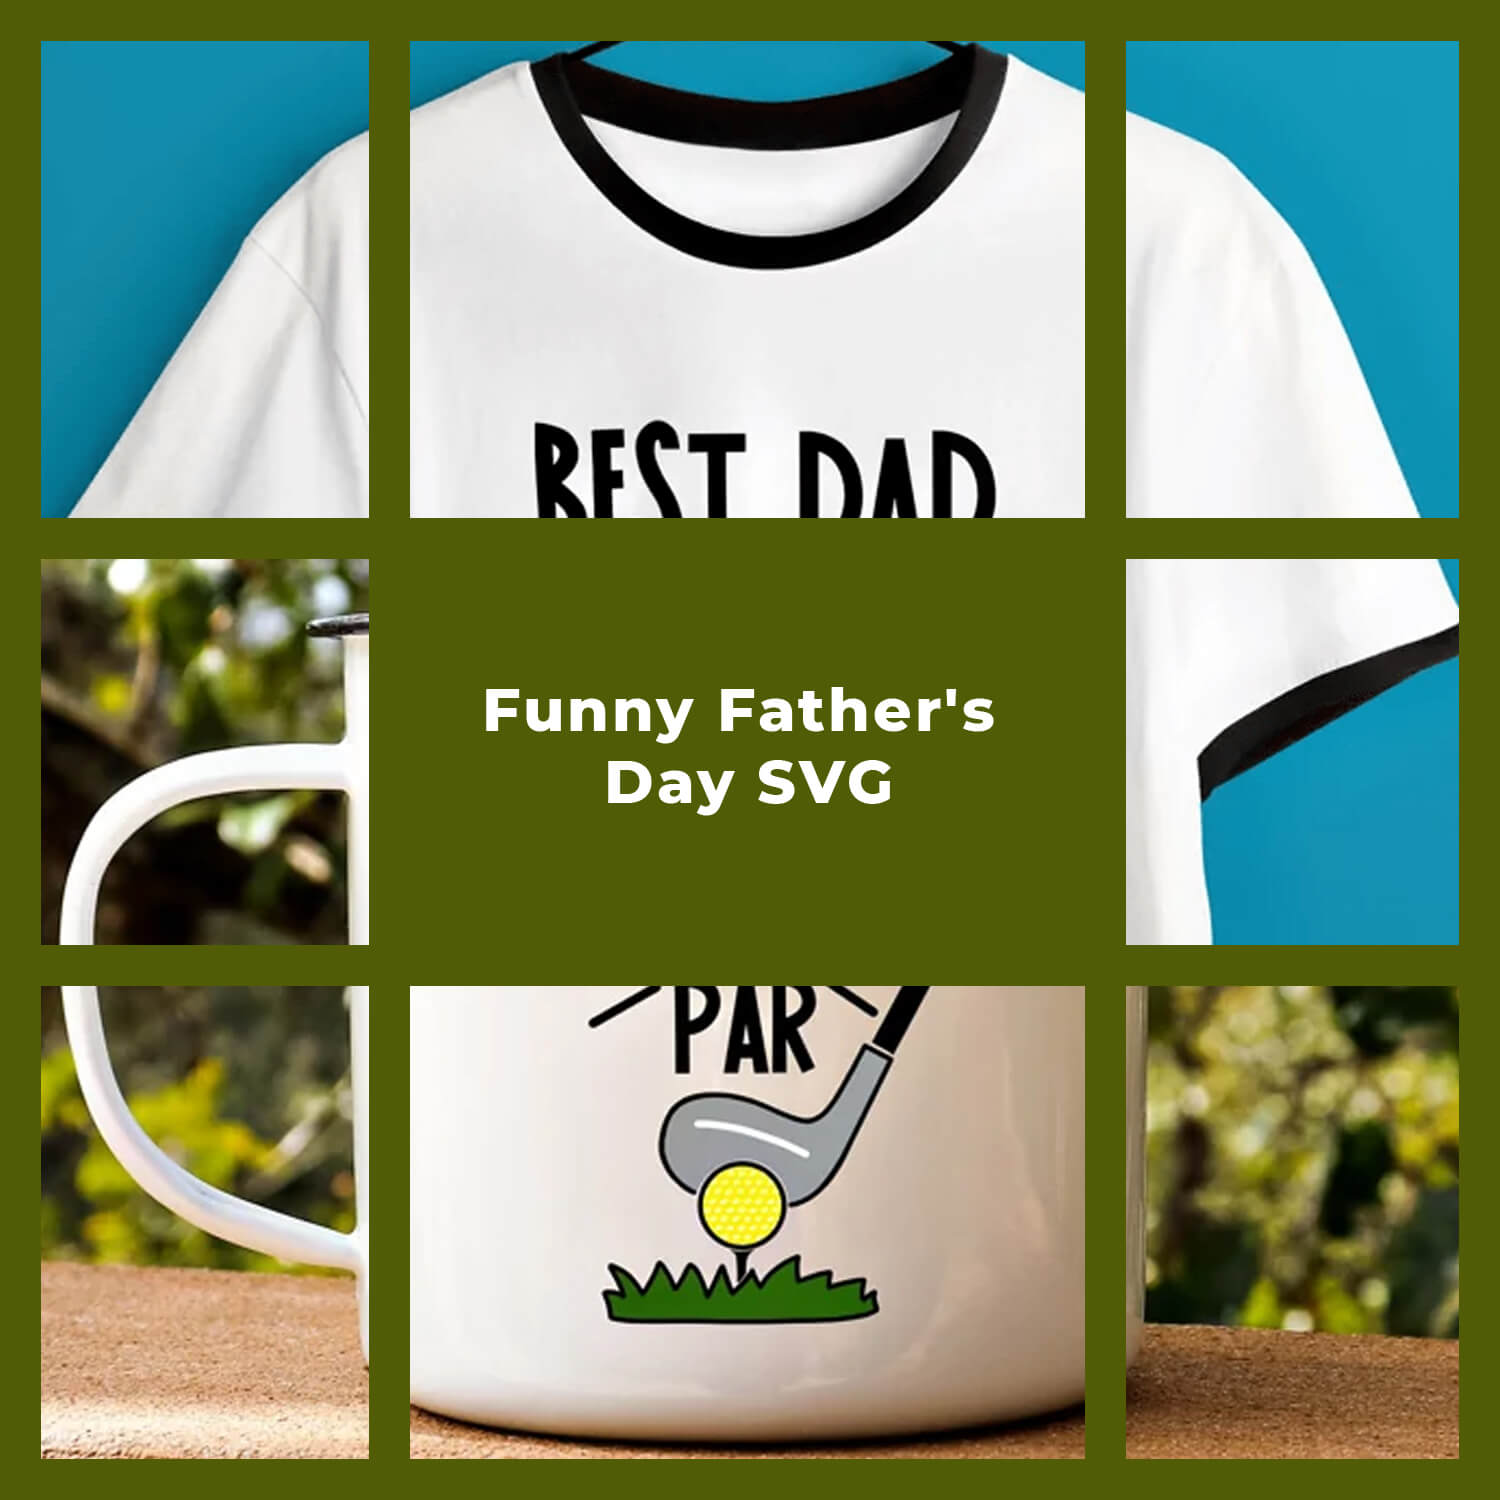 Interesting design examples of funny father's day SVG.